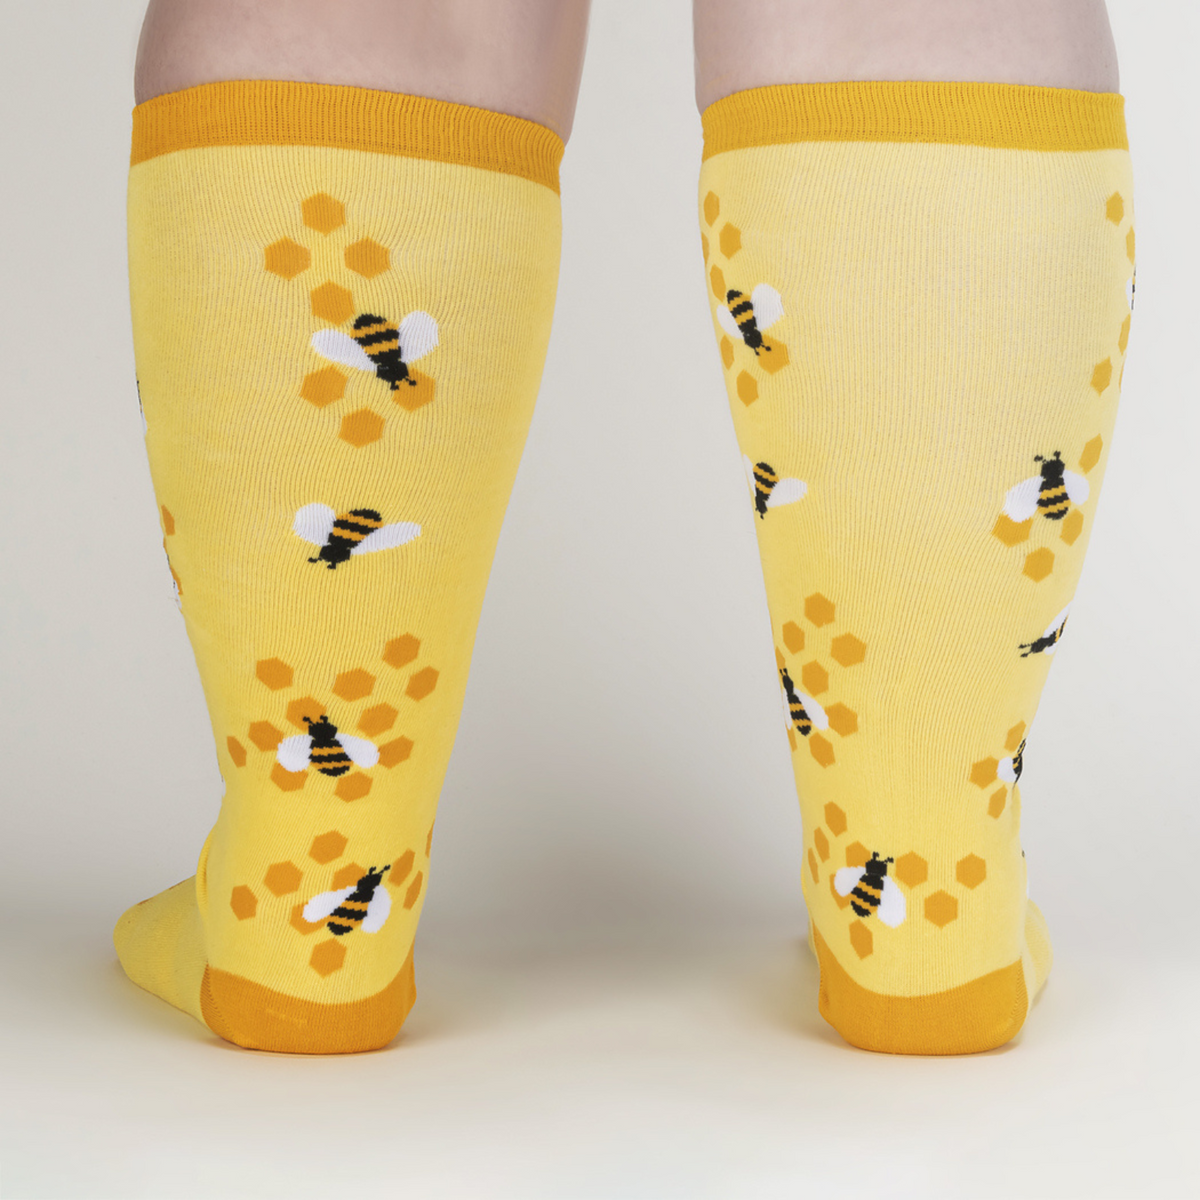 Sock It To Me extra-stretchy yellow knee high sock Bees Knees featuring honeycomb and bees all over on model from behind